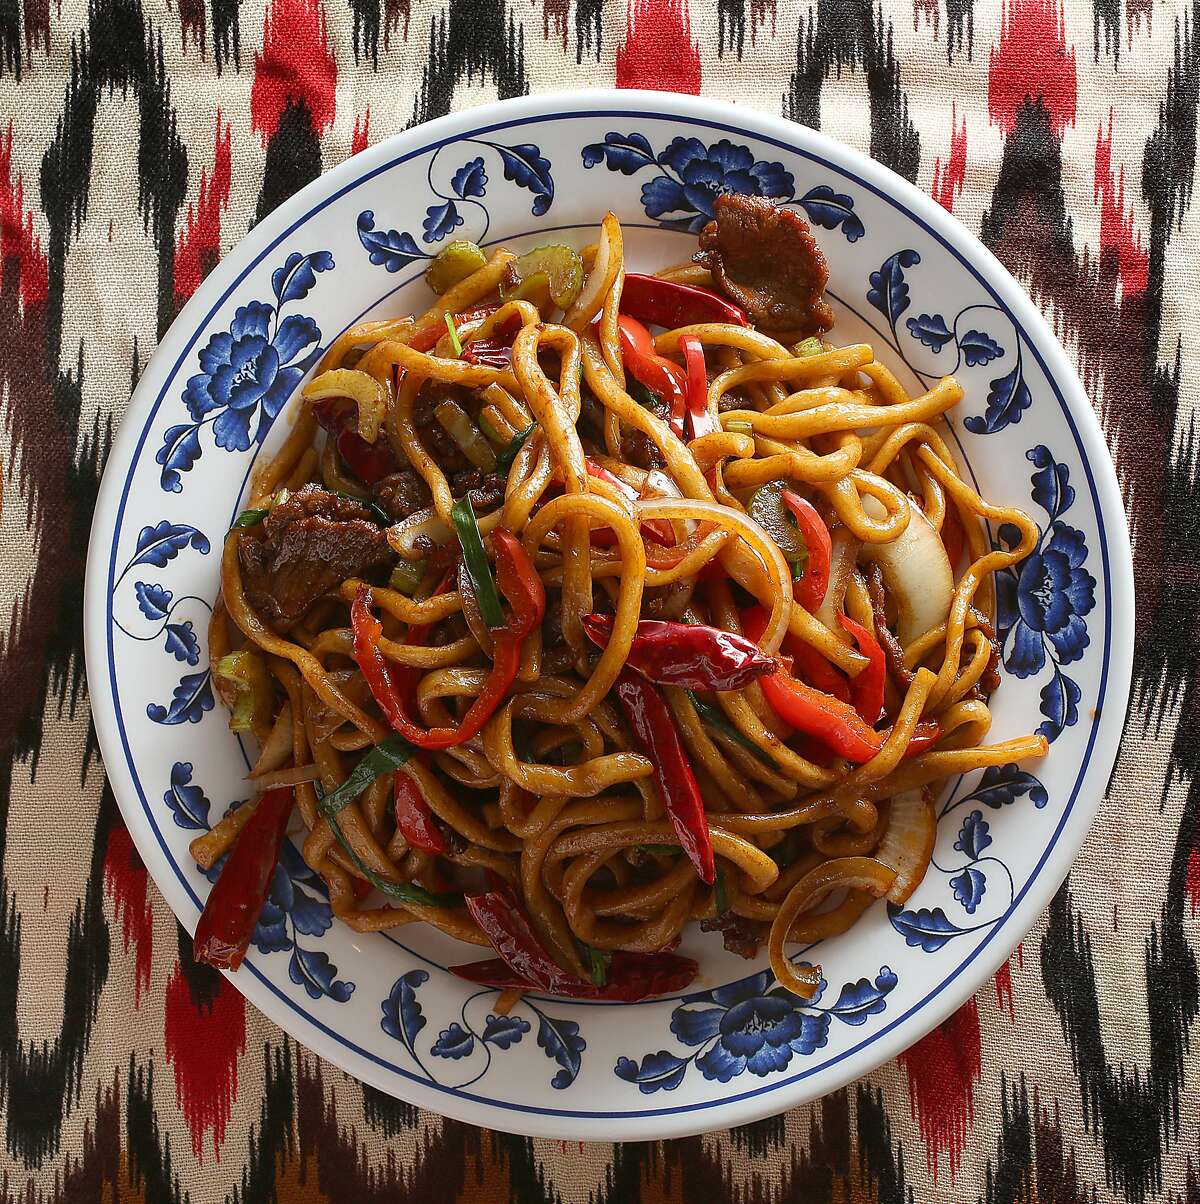 Stir fried noodles with vegetables & beef at Sama Uyghur, one of the only Uyghur (northwest Chinese and Muslim) restaurants in the Bay Area on Monday, December 18, 2017, in Union City, Ca.